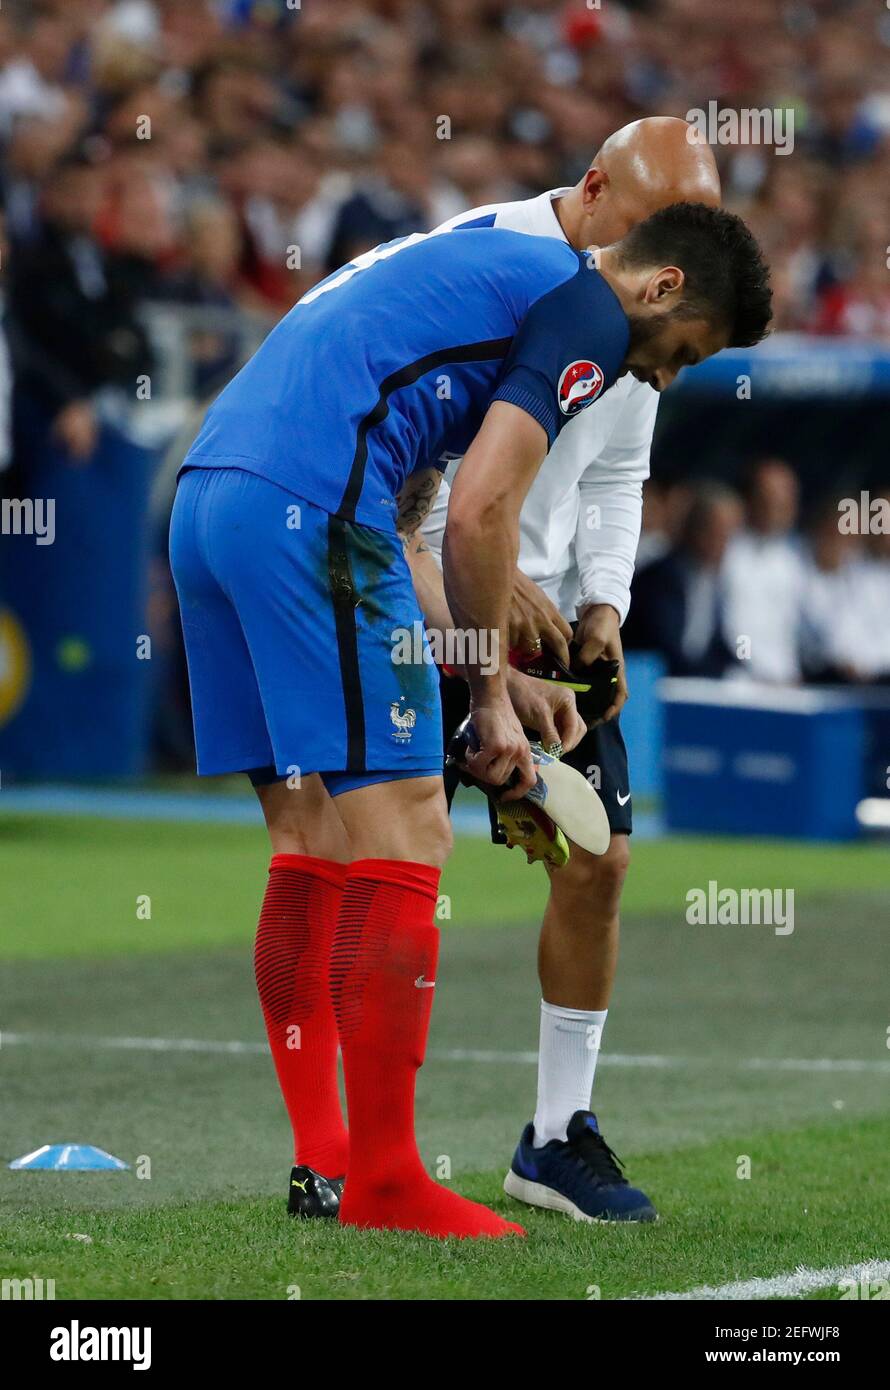 Football Soccer - France / Albanie - EURO 2016 - Groupe A - Stade  Vélodrome, Marseille, France - 15/6/16 Olivier Giroud change de chaussures  REUTERS/Yves Herman Livepic Photo Stock - Alamy